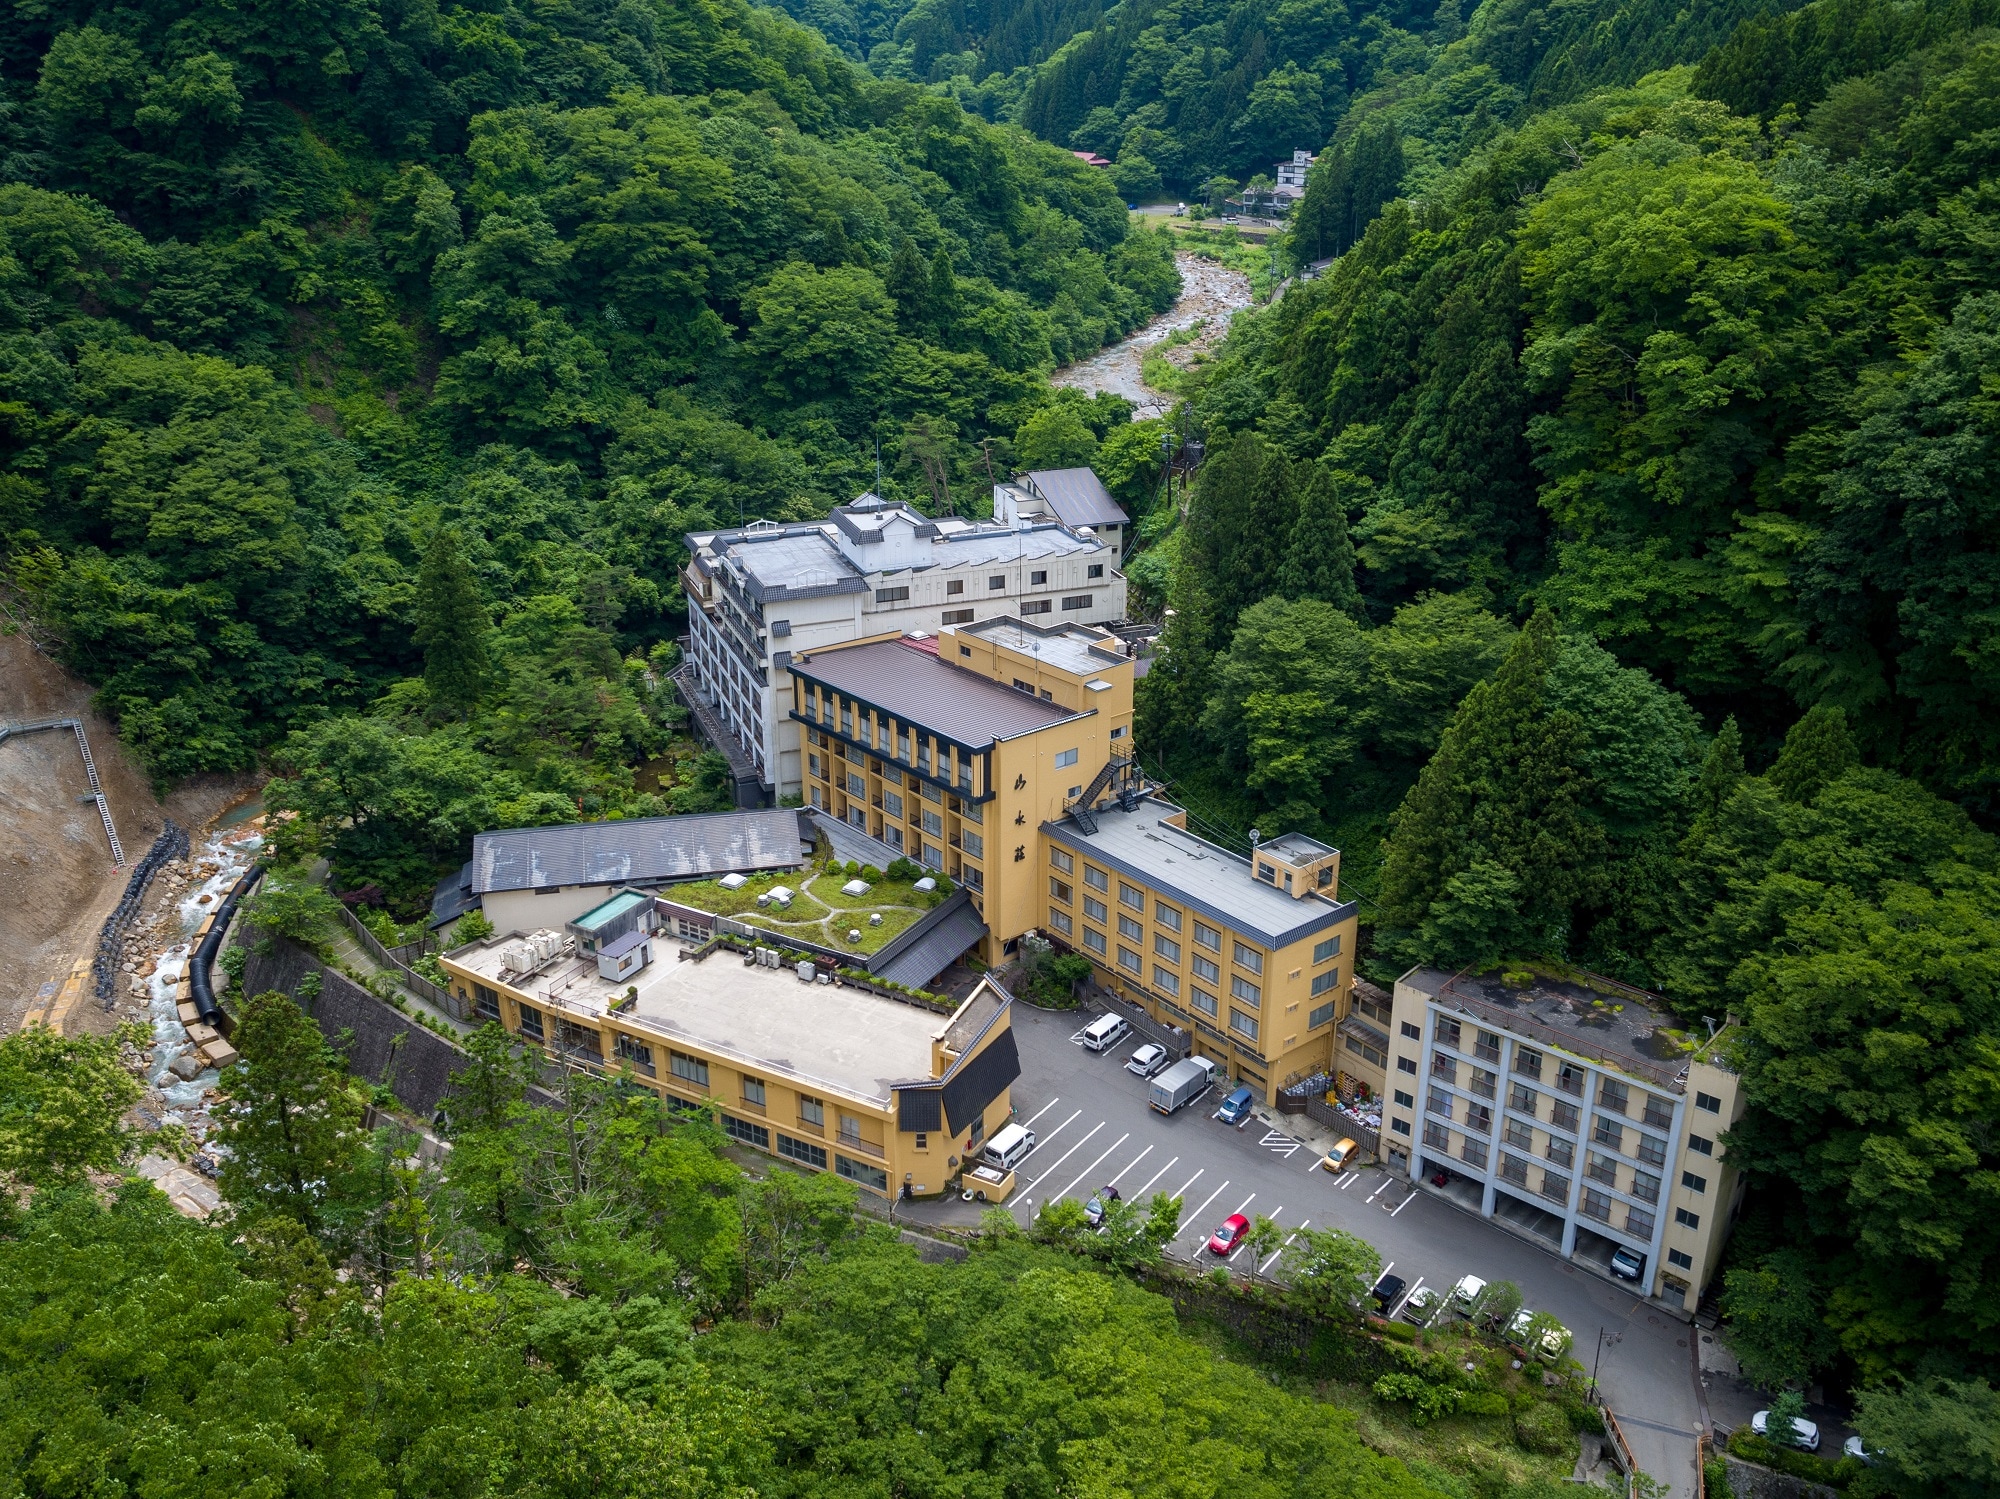 Sansuiso surrounded by lush nature